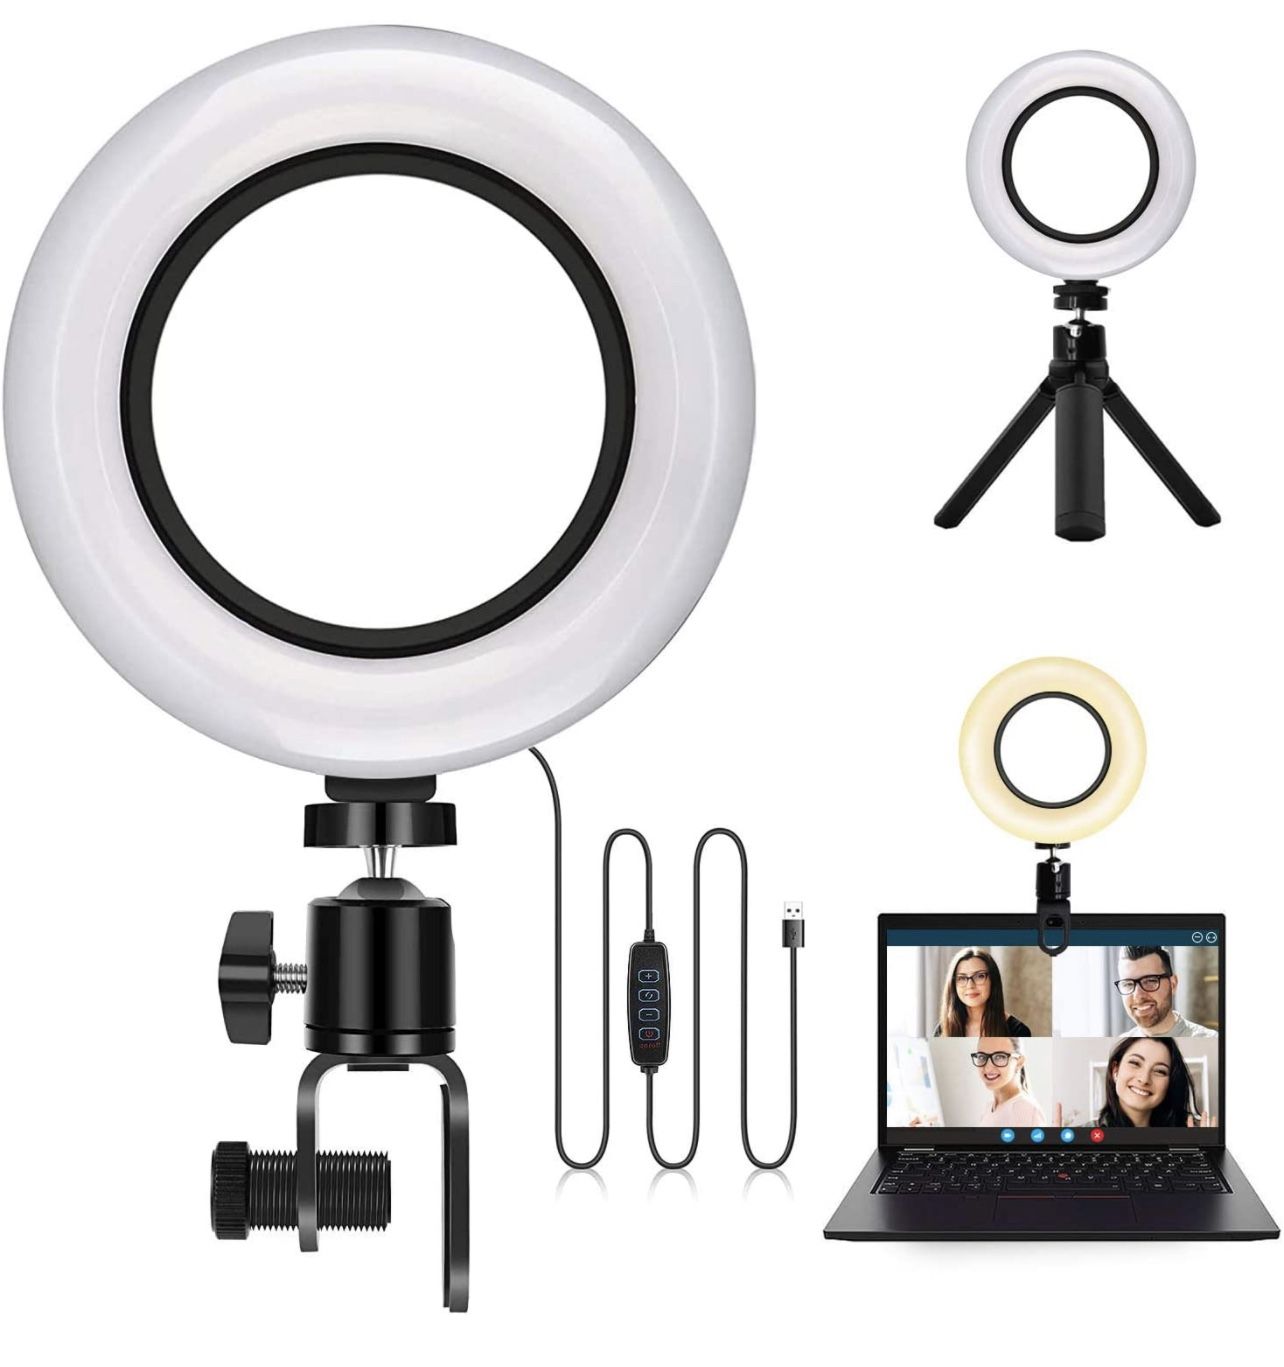 6" LED Ring Light with Clamp Mount and Tripod Stand, Selfie Video Conference Lighting for Laptop Computer, Mini Portable Desktop Ring Light for Live S